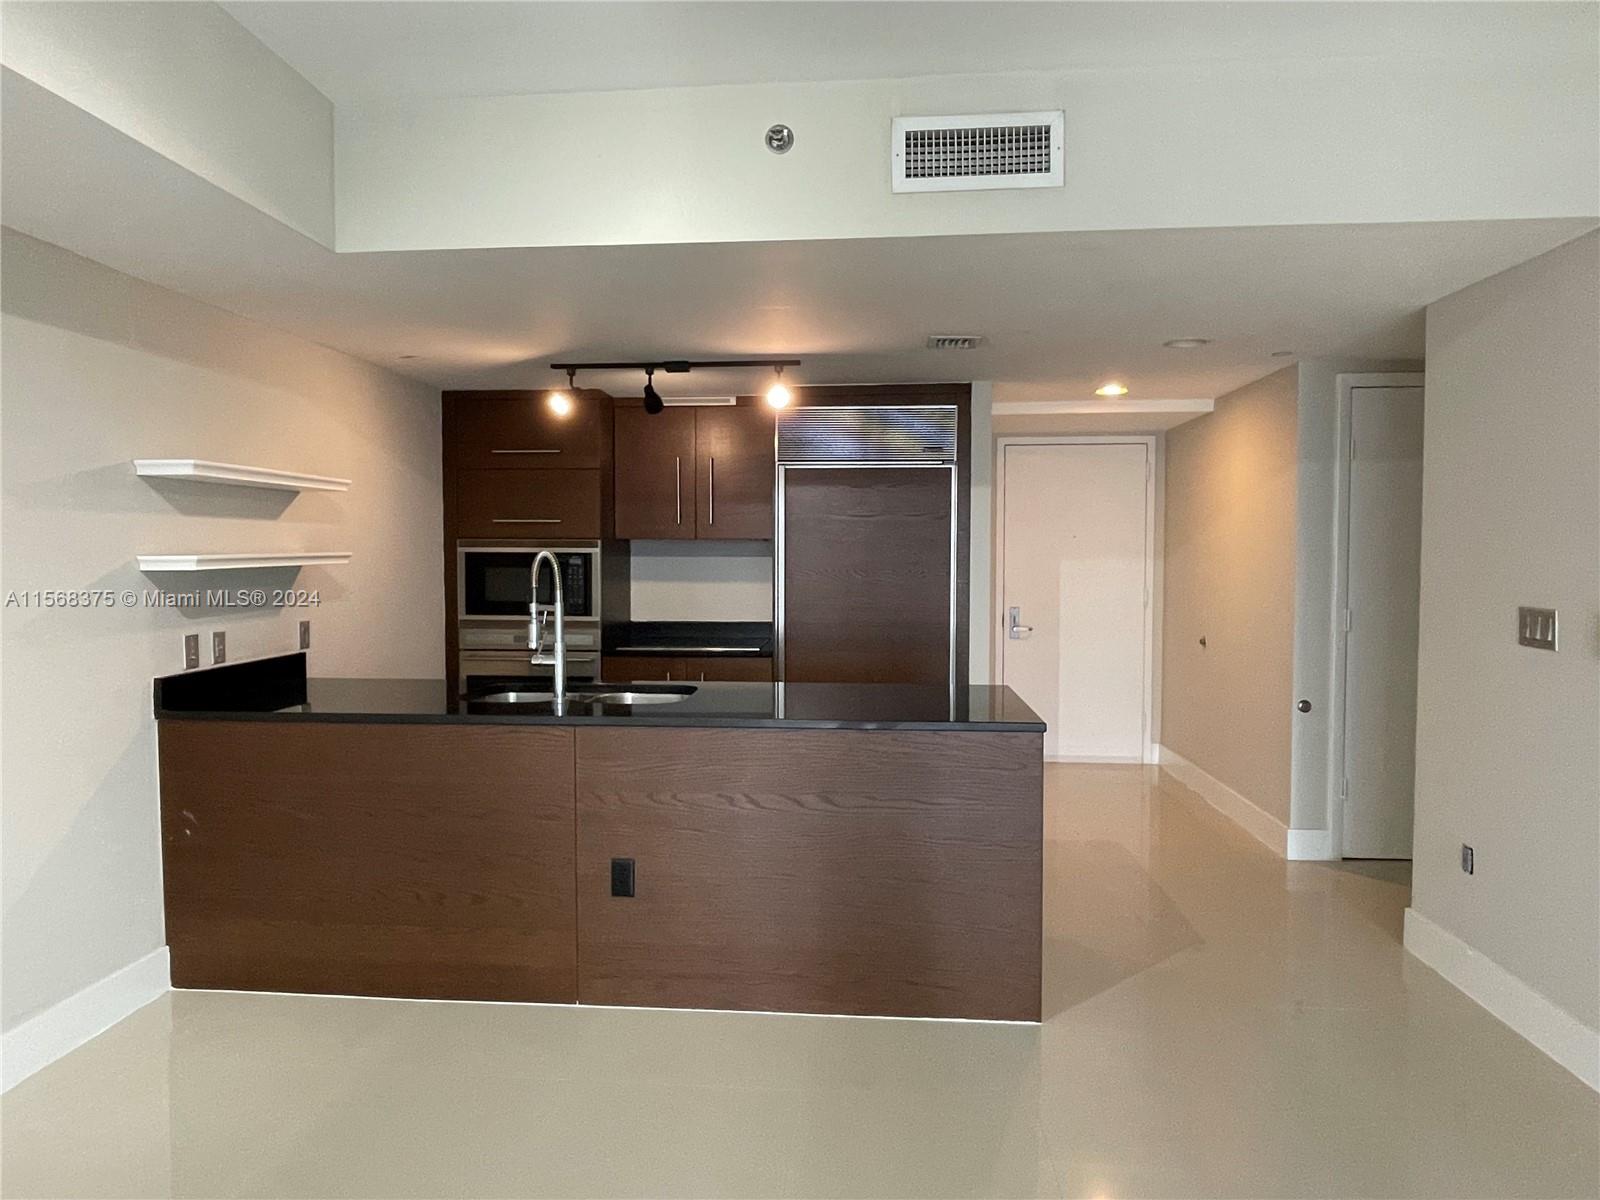 Beautiful, bright and spacious 1 bedroom overlooking the Miami River and Dog Park located on a 4th floor. Icon Brickell offers luxury living as its best as well as the opportunity to walk everywhere in Brickell and Downtown. Olympic sized pool, Jacuzzi, Spa, Famous restaurants & more.